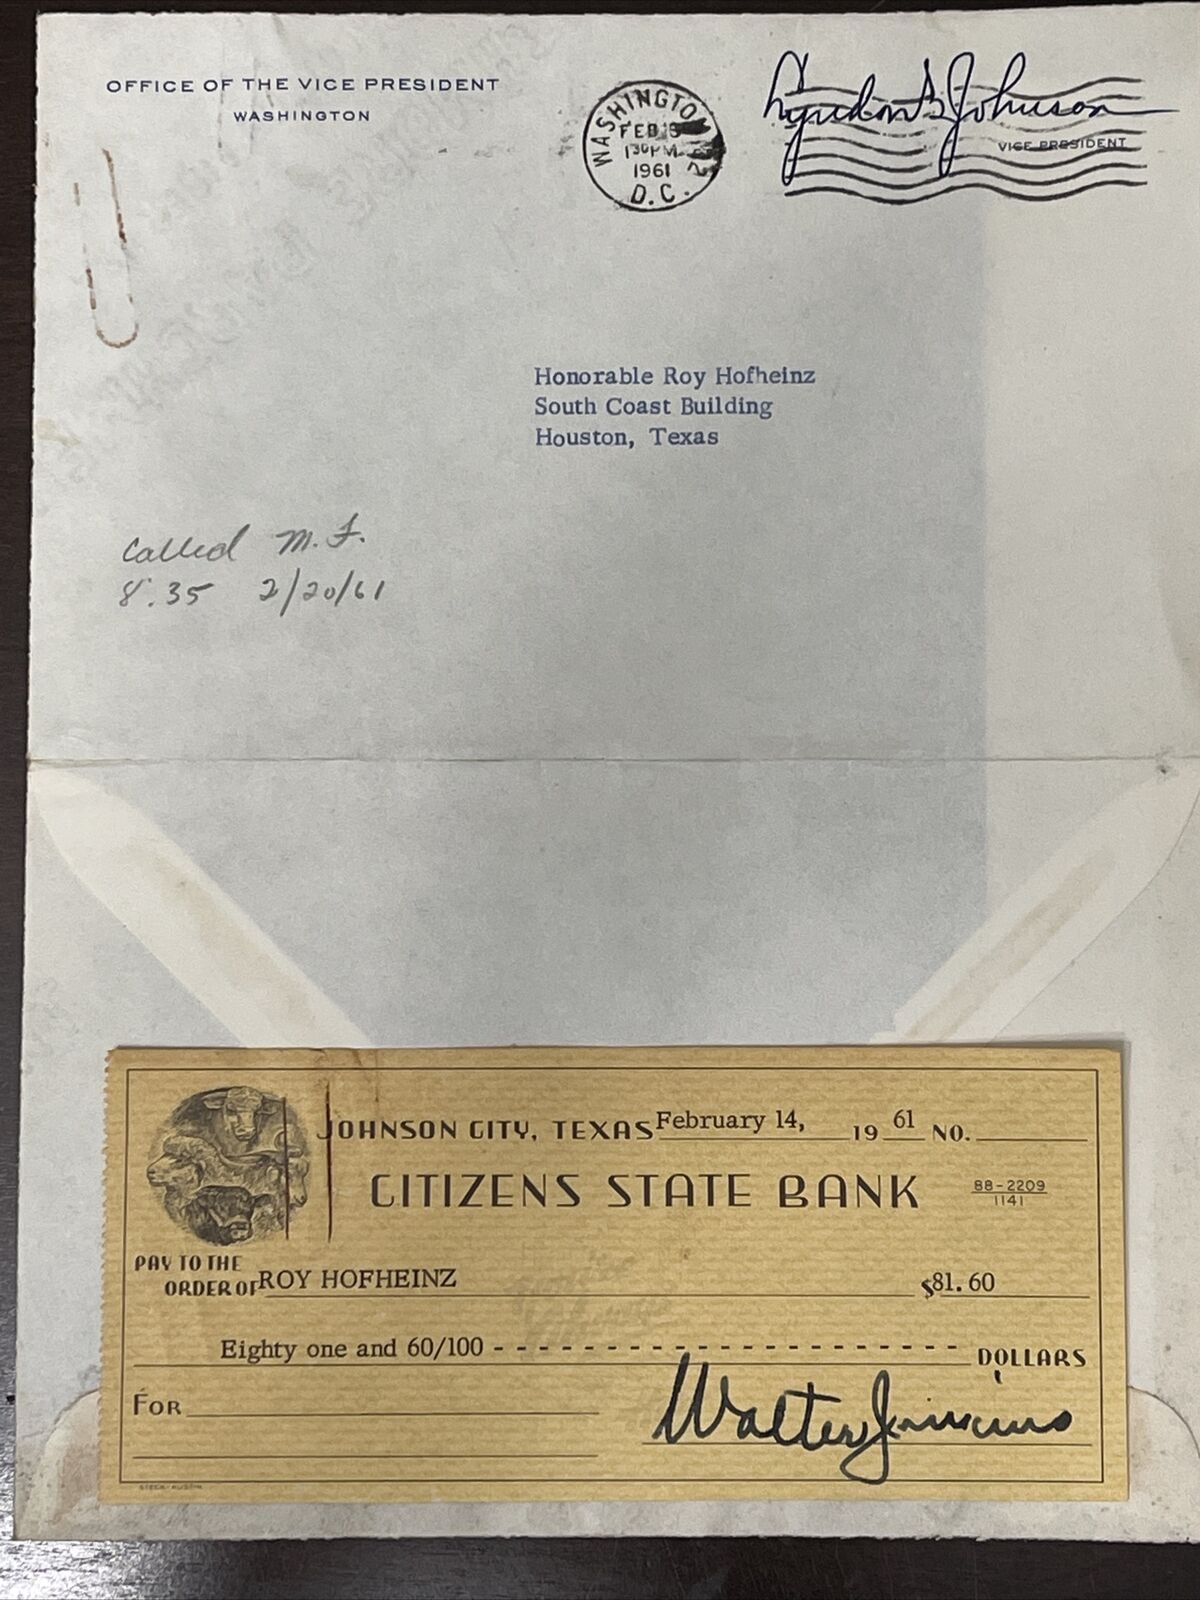 1961 Lyndon Johnson Signed Envelope with letter and check to Judge Roy Hofheinz